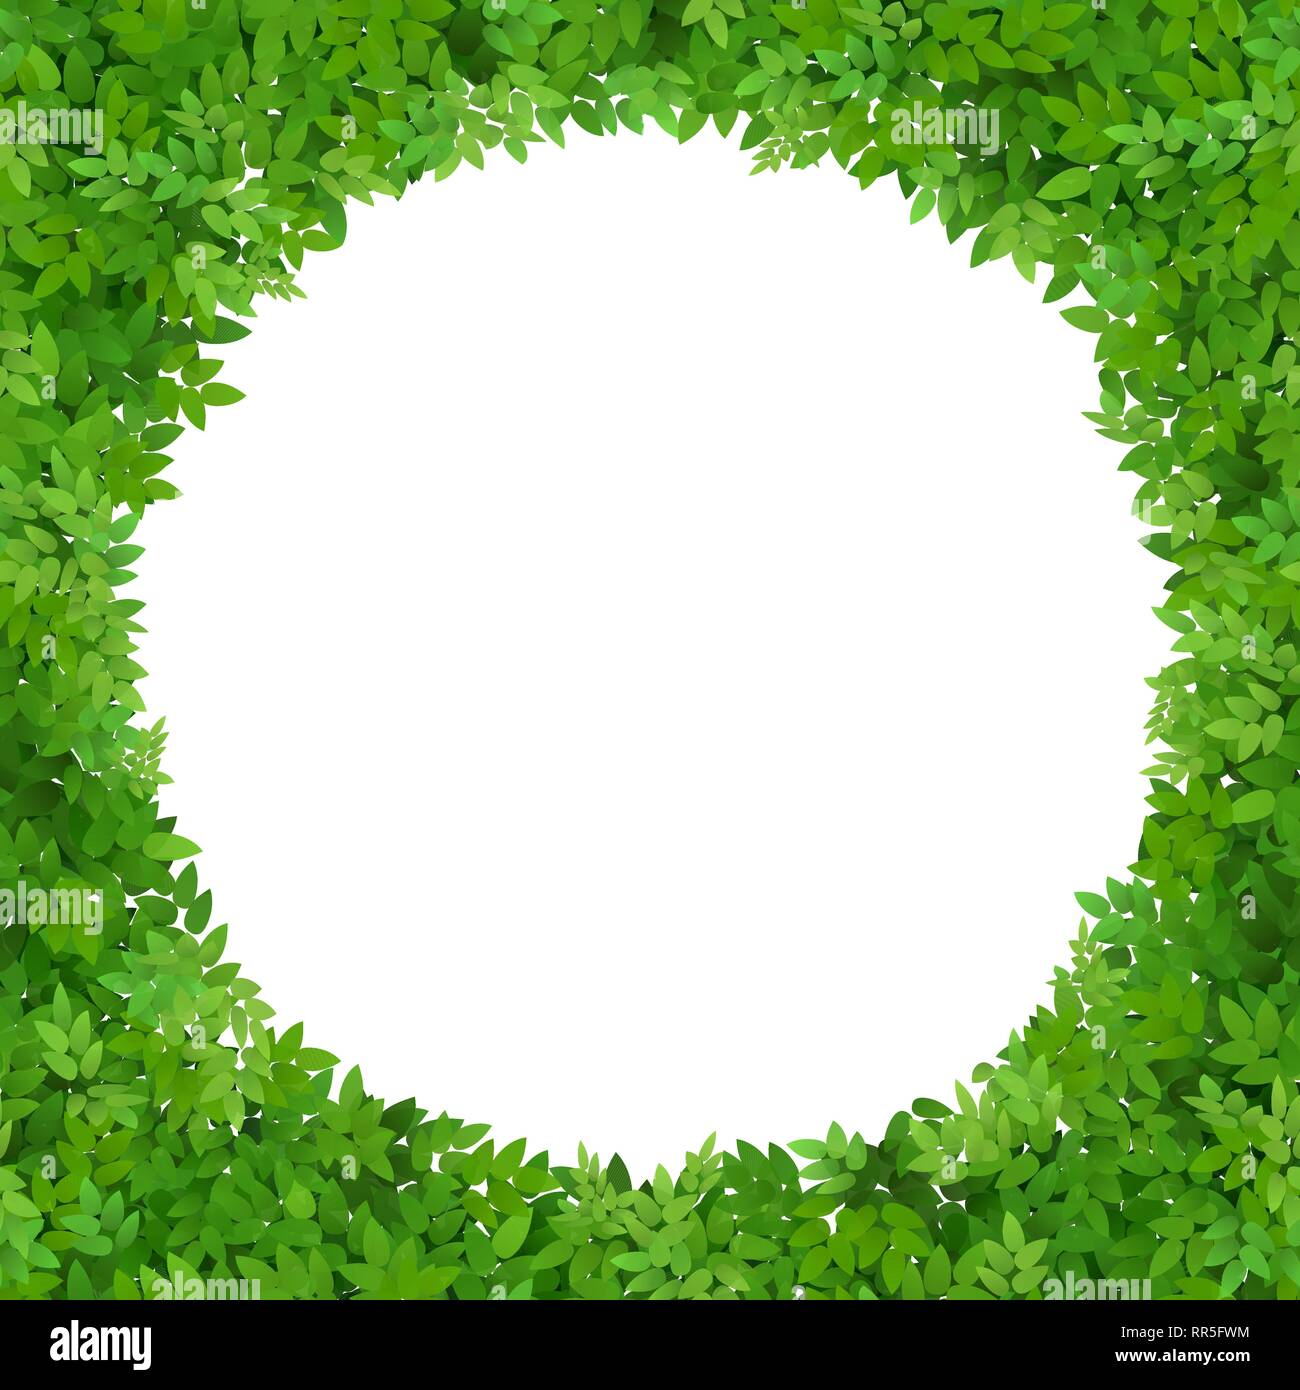 Circular frame of green leaves. Green foliage. Blank for card. Stock Vector